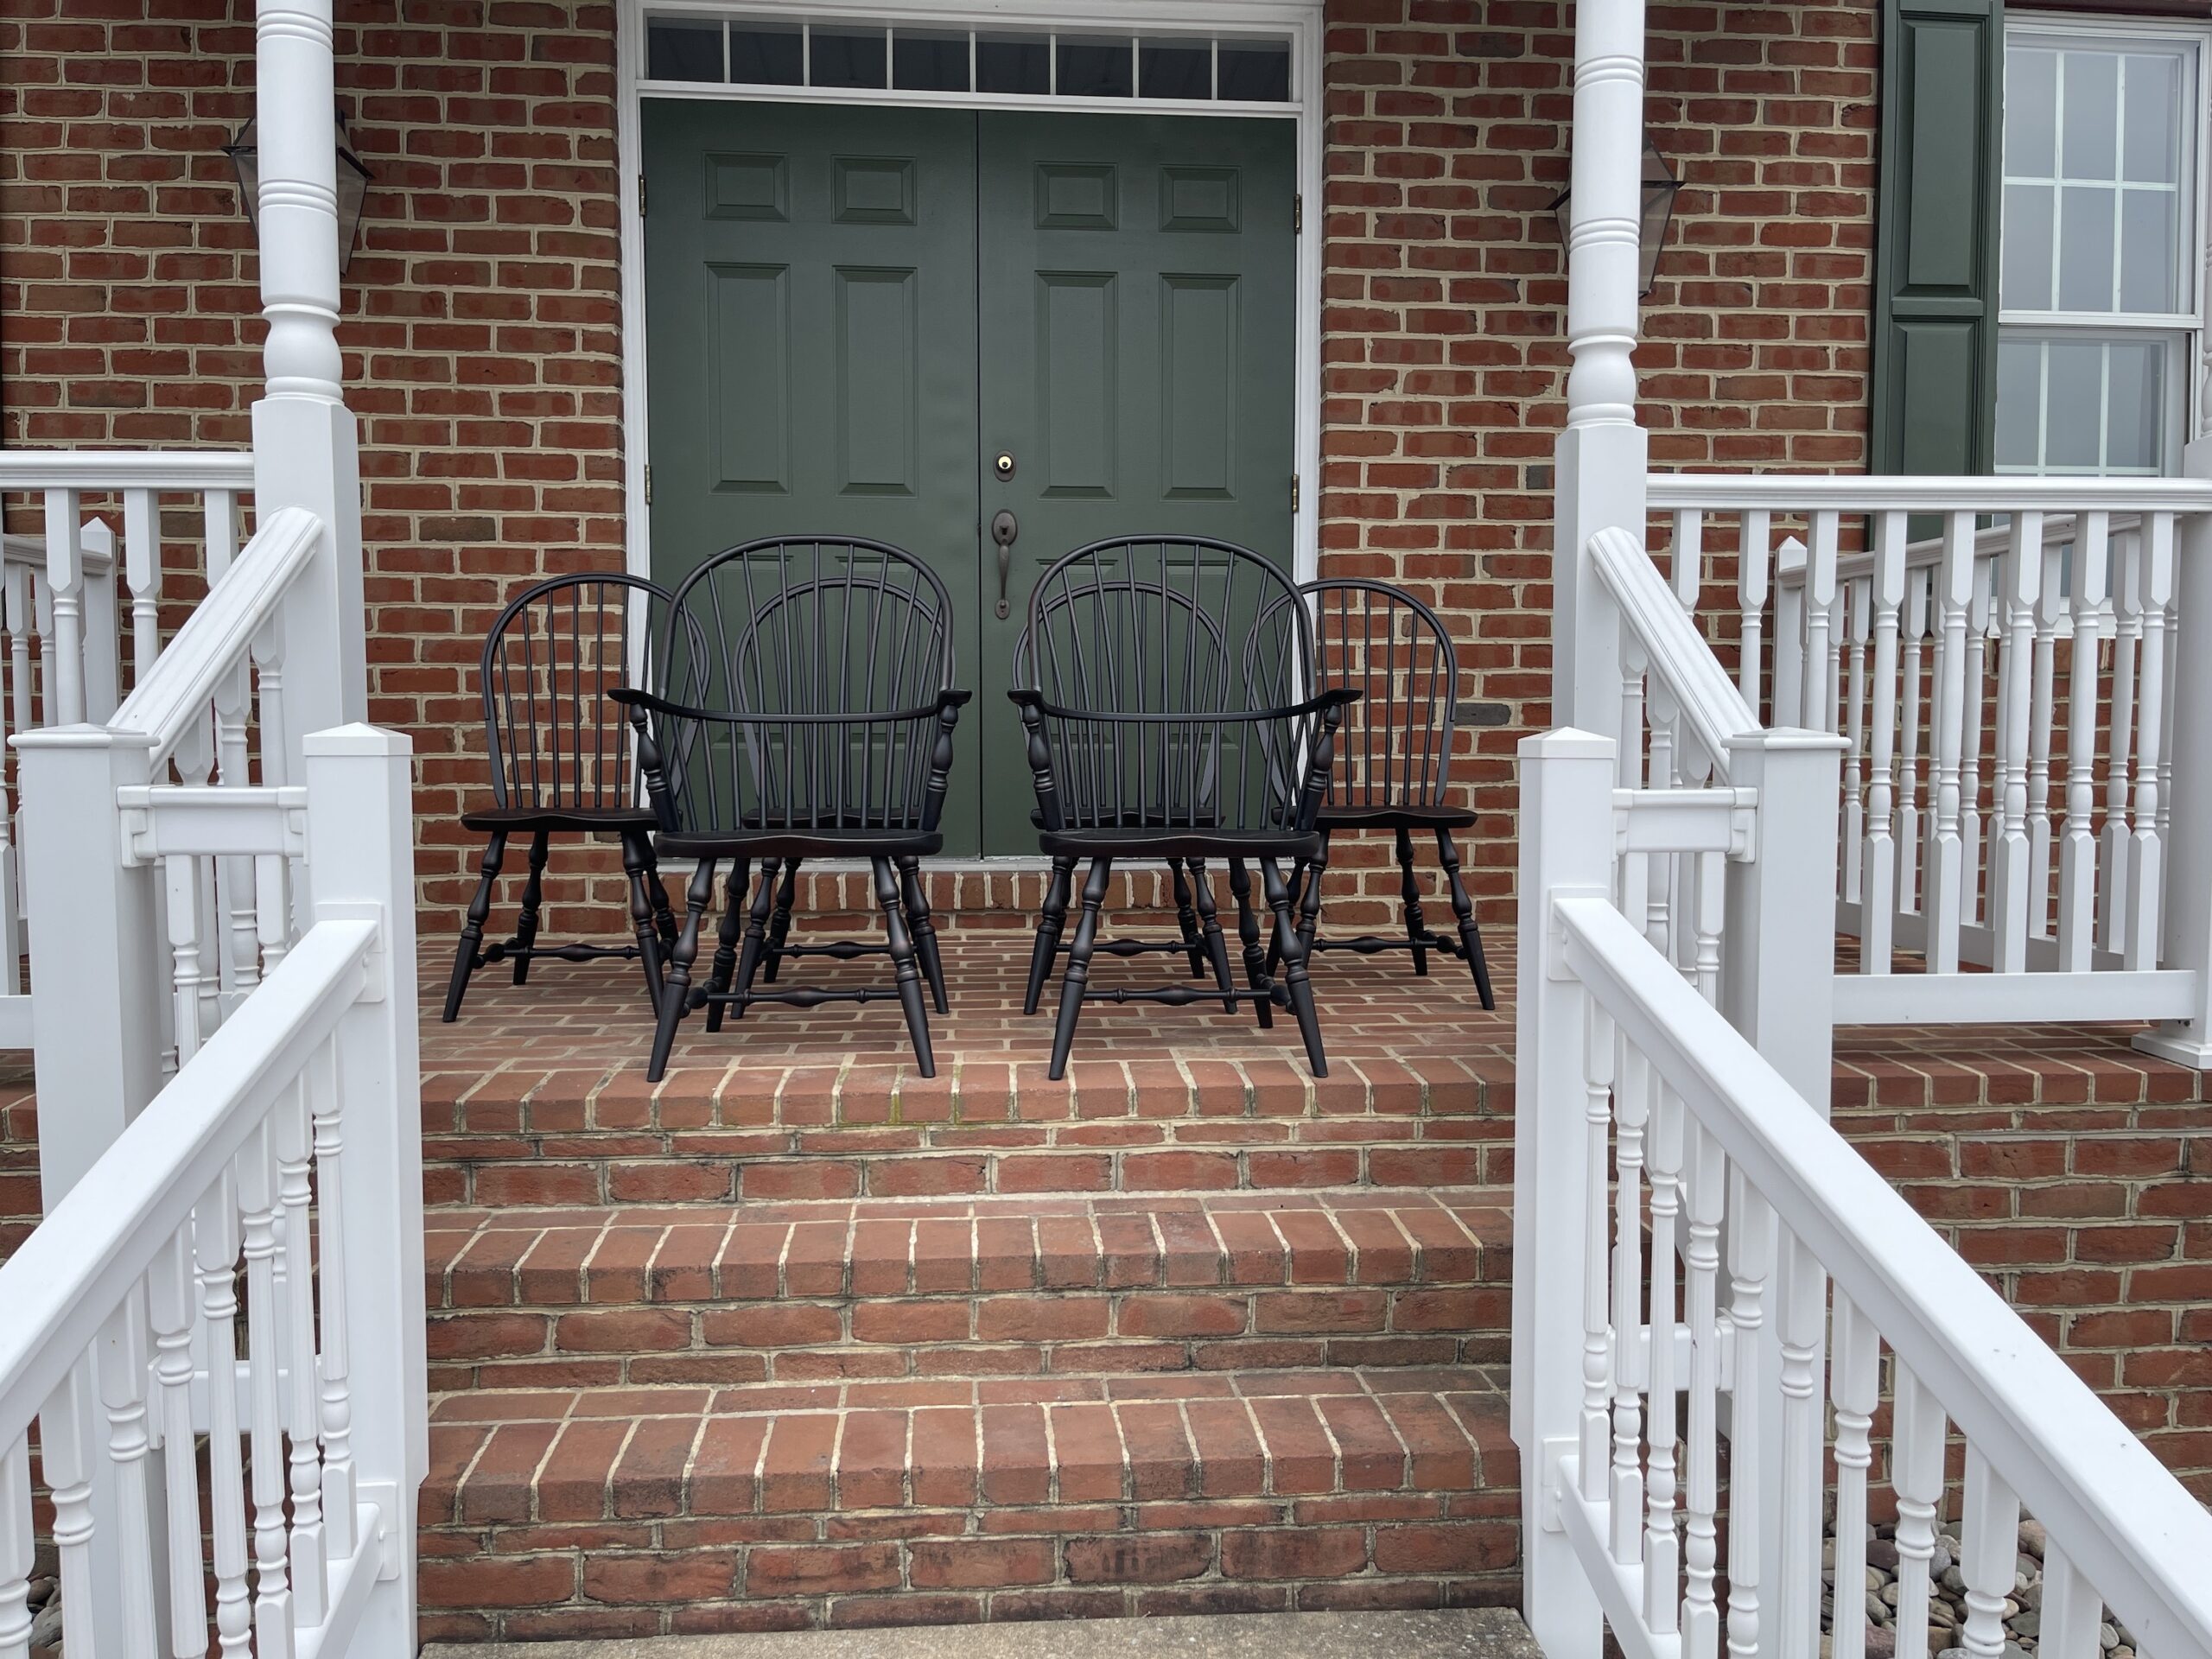 Windsor Kitchen Chairs Image